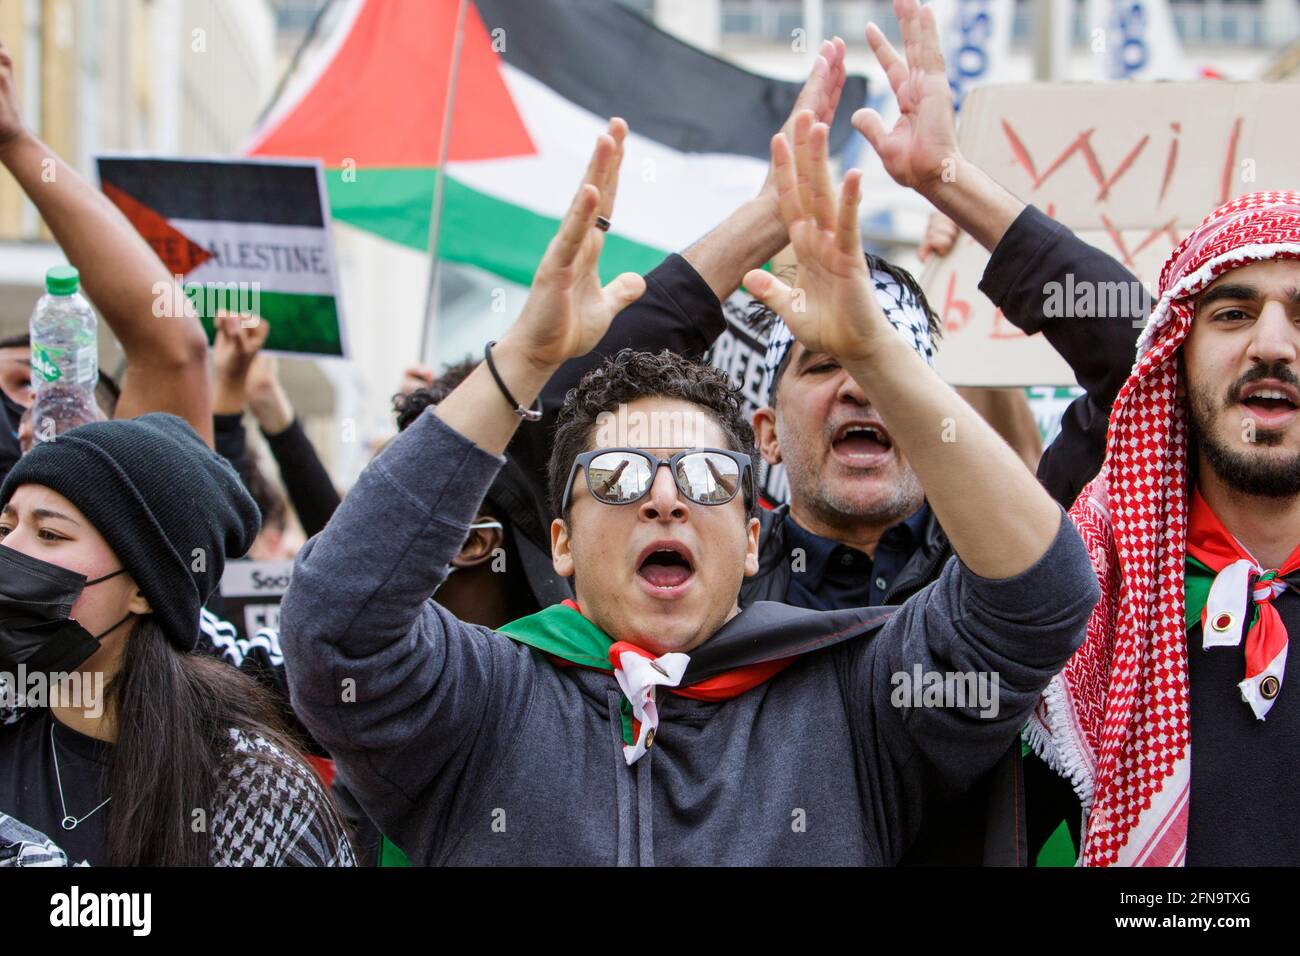 Bristol, UK. 15th May, 2021. Pro-Palestinian demonstrators waving Palestinian flags are pictured as they march through Bristol in a protest march to show their solidarity with the Palestinian people. The protest march and rally was held to allow people to show their support and solidarity with the Palestinian people after 73 Years of Nakba and to protest about Israel's recent actions in Gaza. Credit: Lynchpics/Alamy Live News Stock Photo